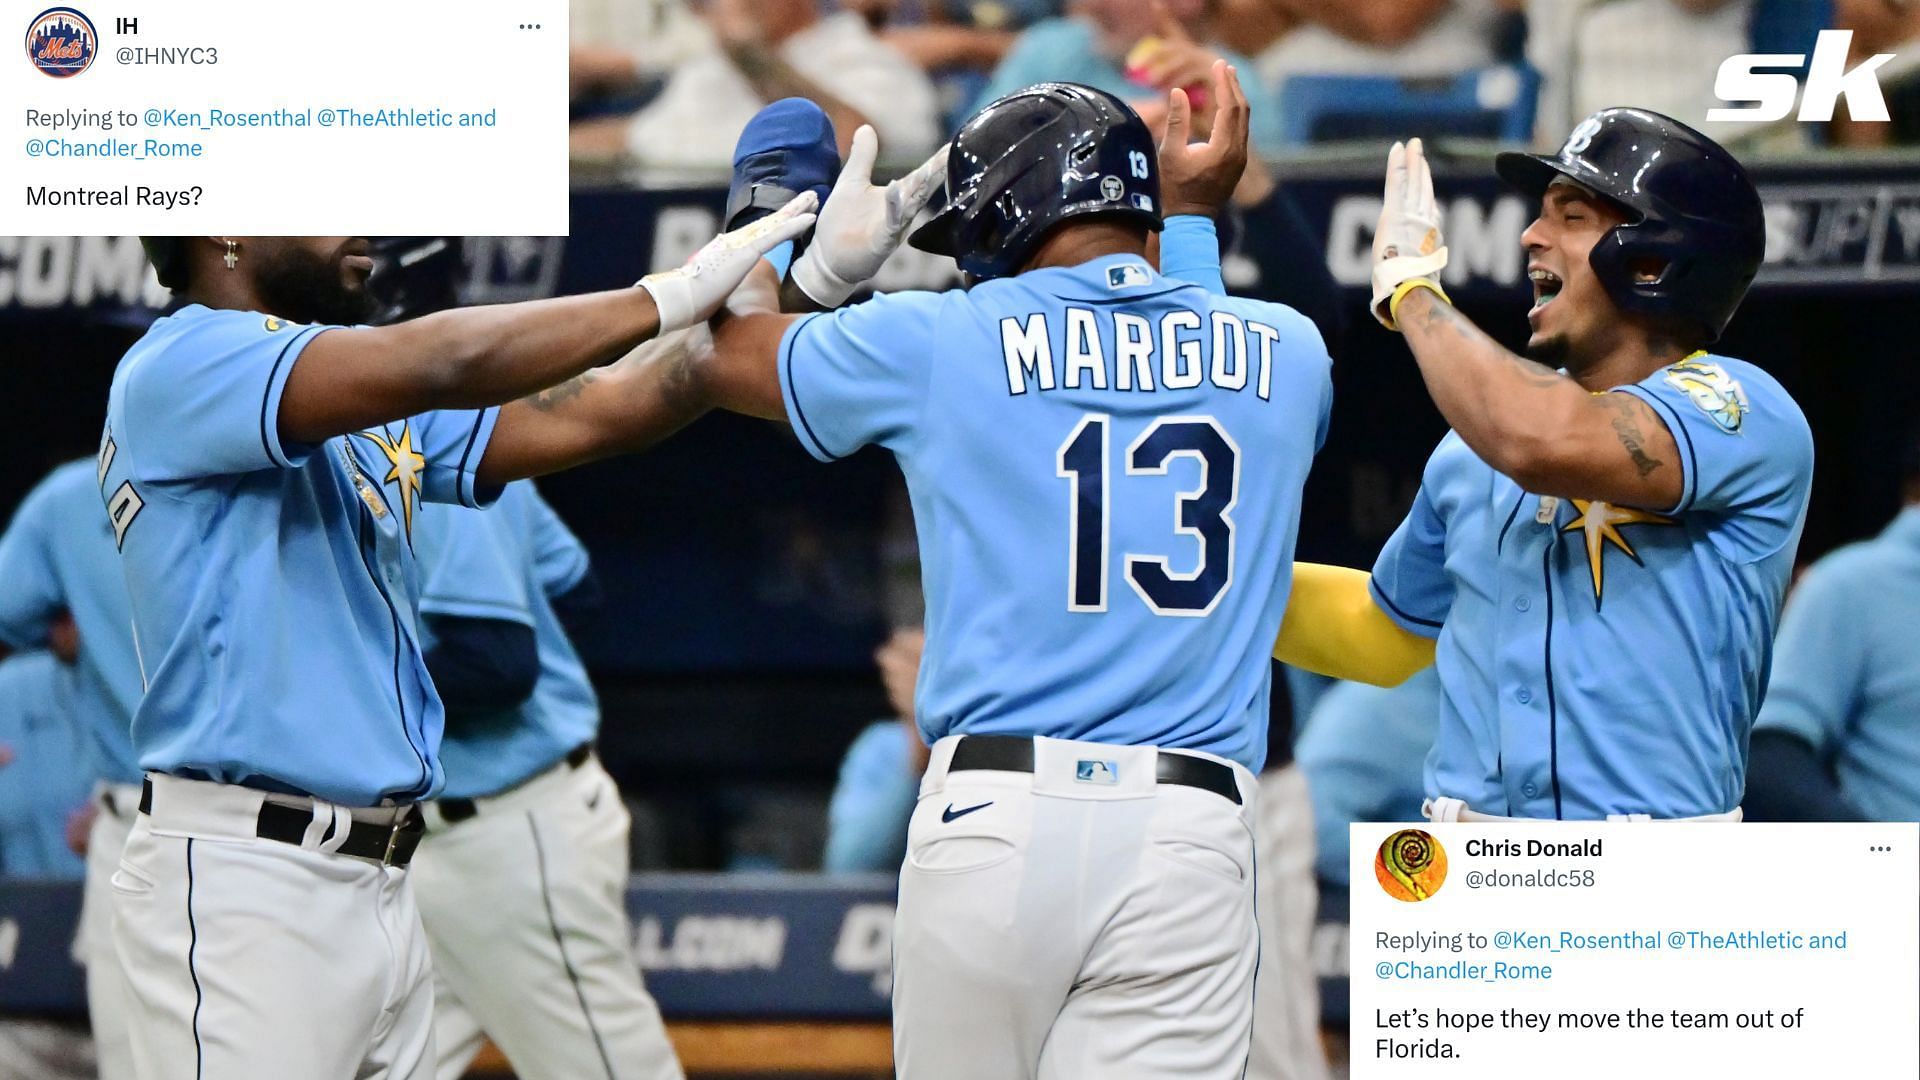 Tampa Bay Rays players celebrate at Tropicana Field